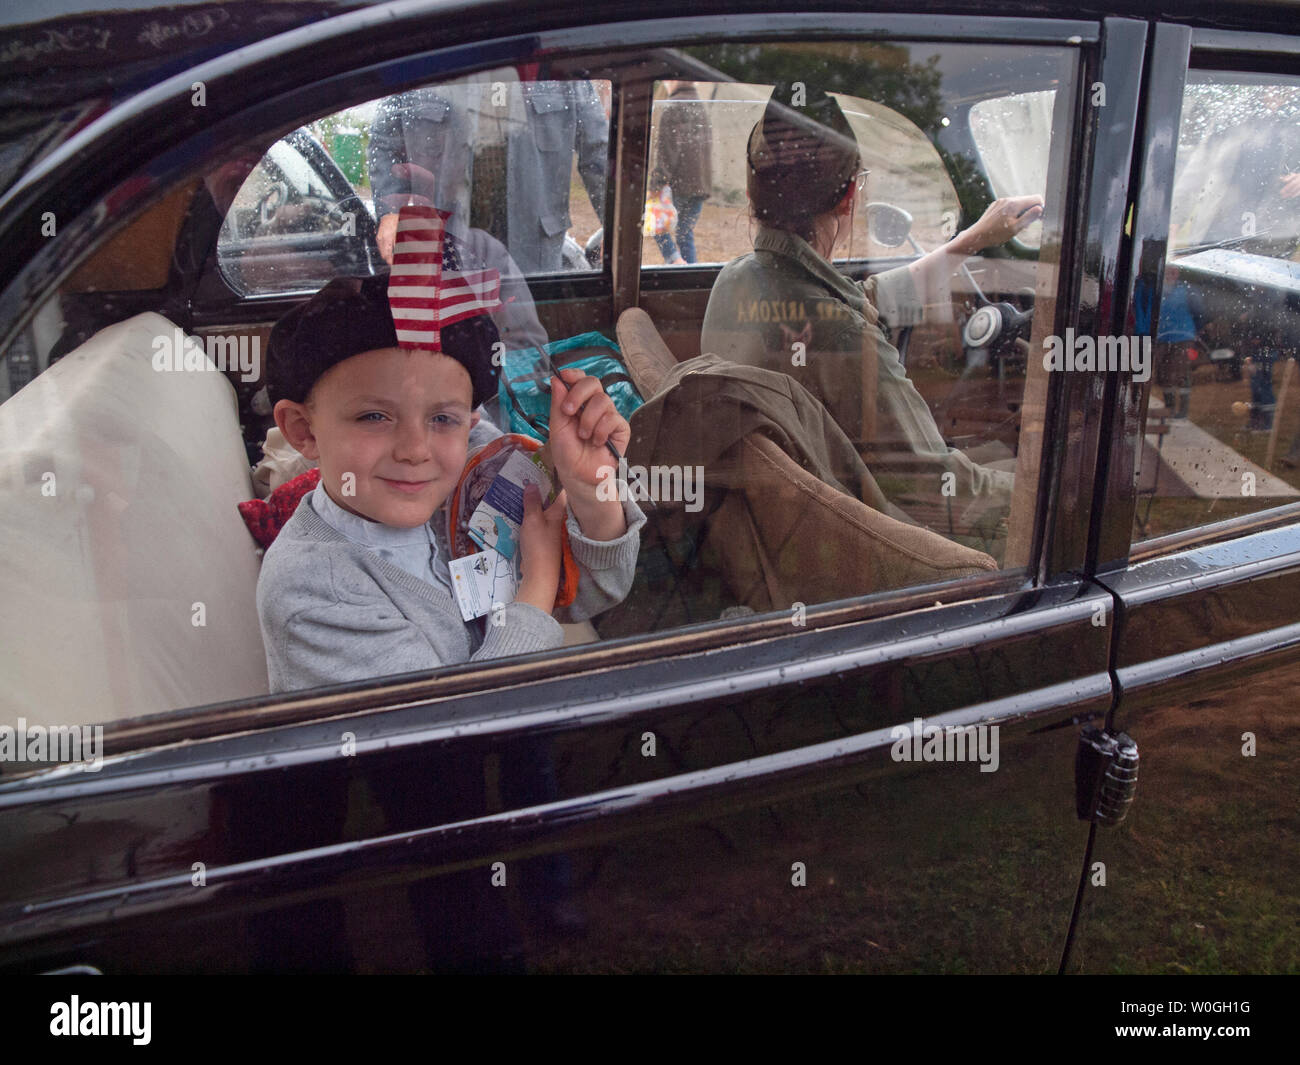 In Normandy a boy waves an American flag at at an event commemorating the D-Day landings Stock Photo